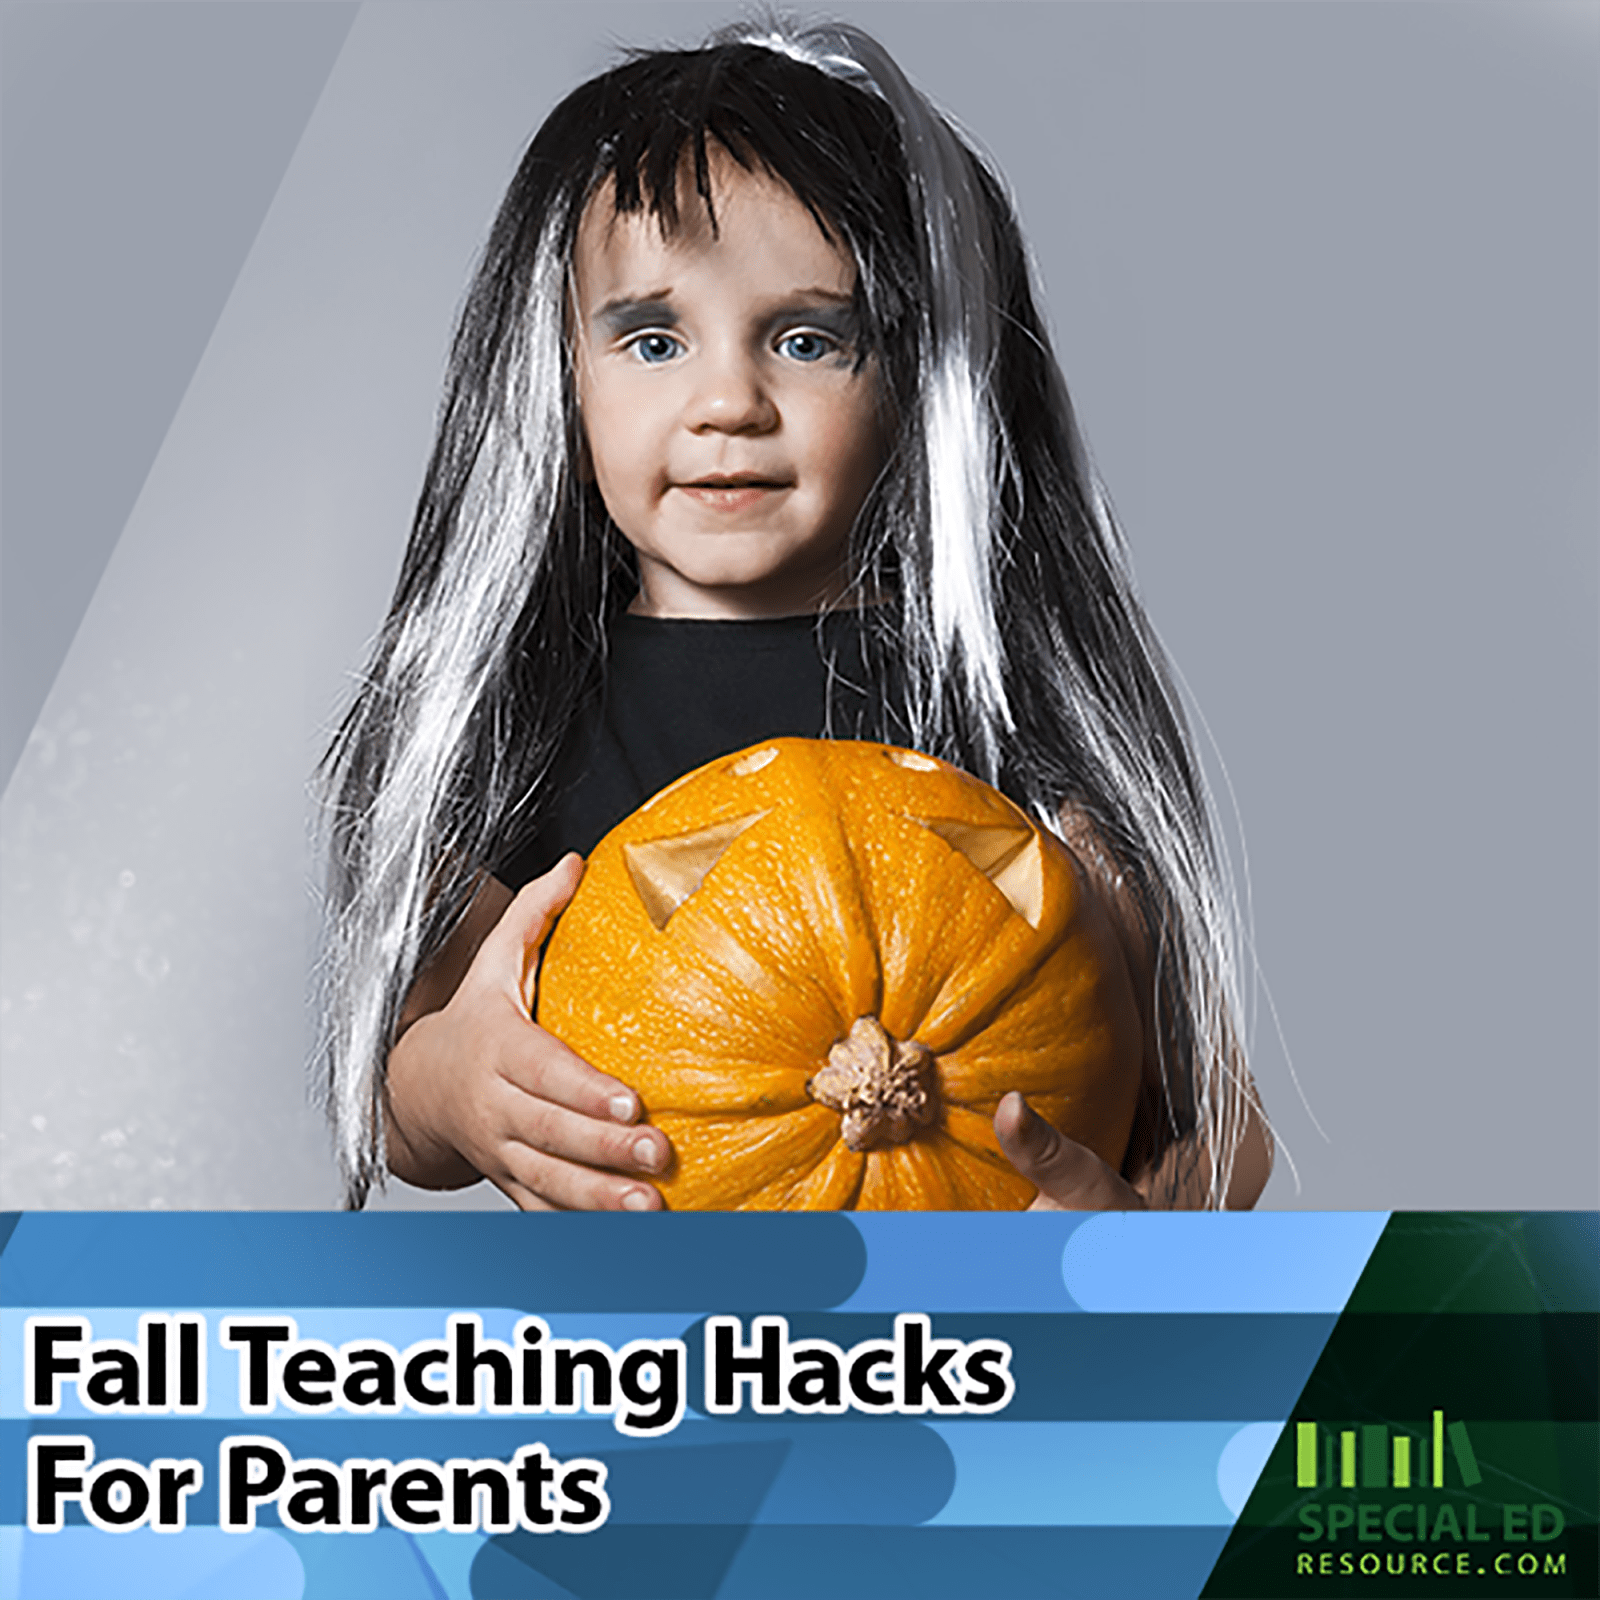 Fall-Teaching-Hacks-For-Parents